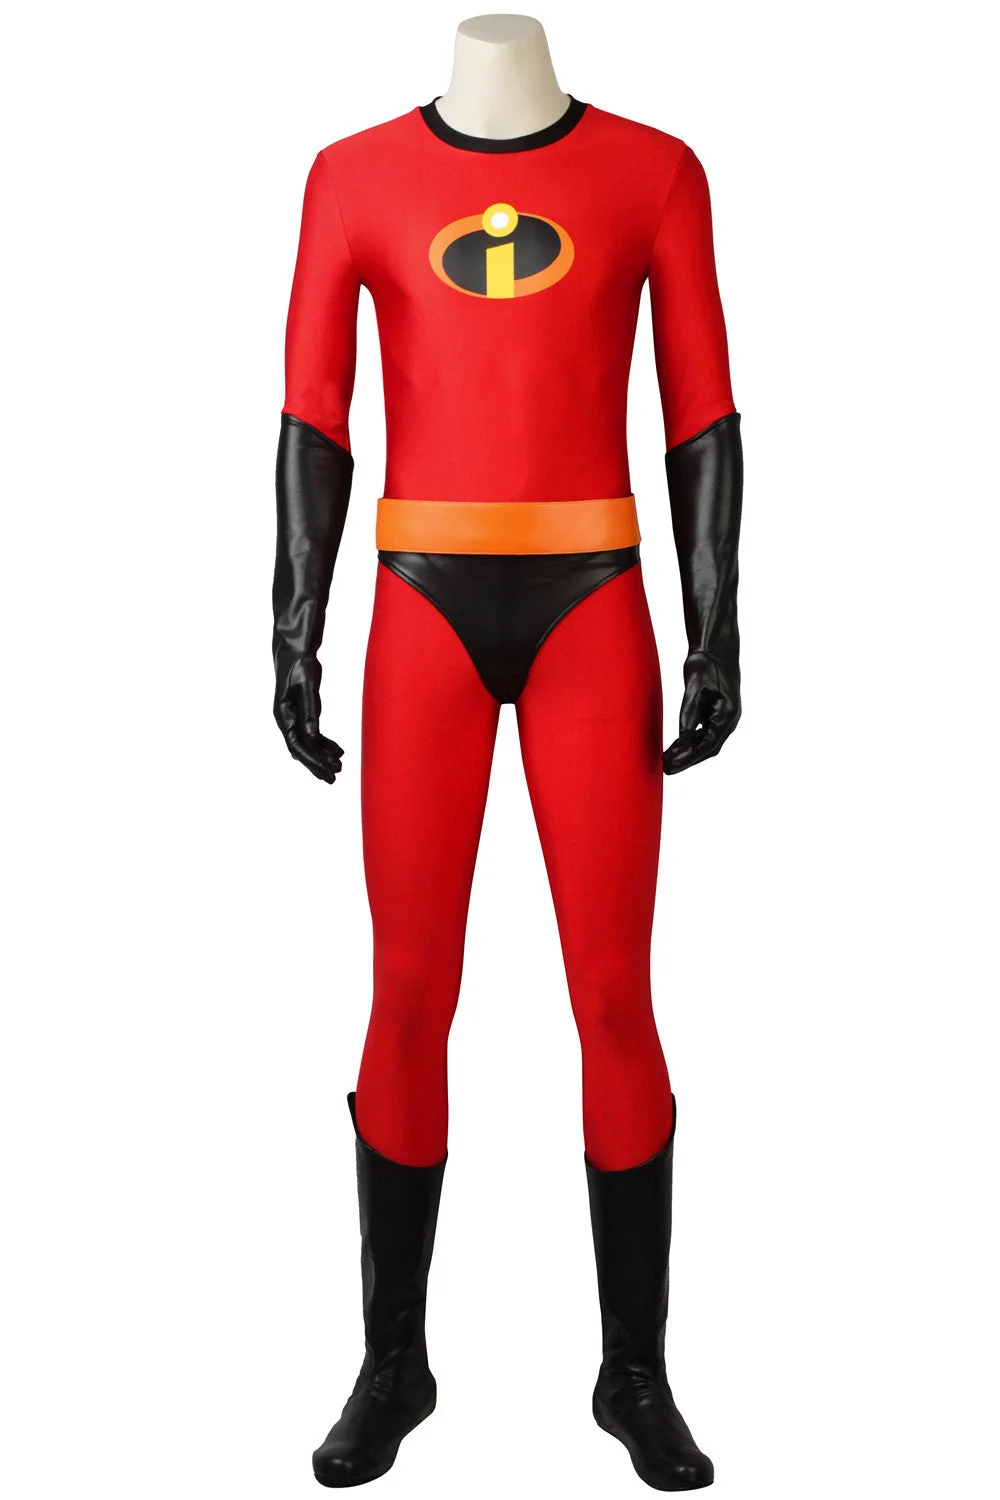 Incredibles 2 Bob Parr Mr. Incredible Outfit Cosplay Costume